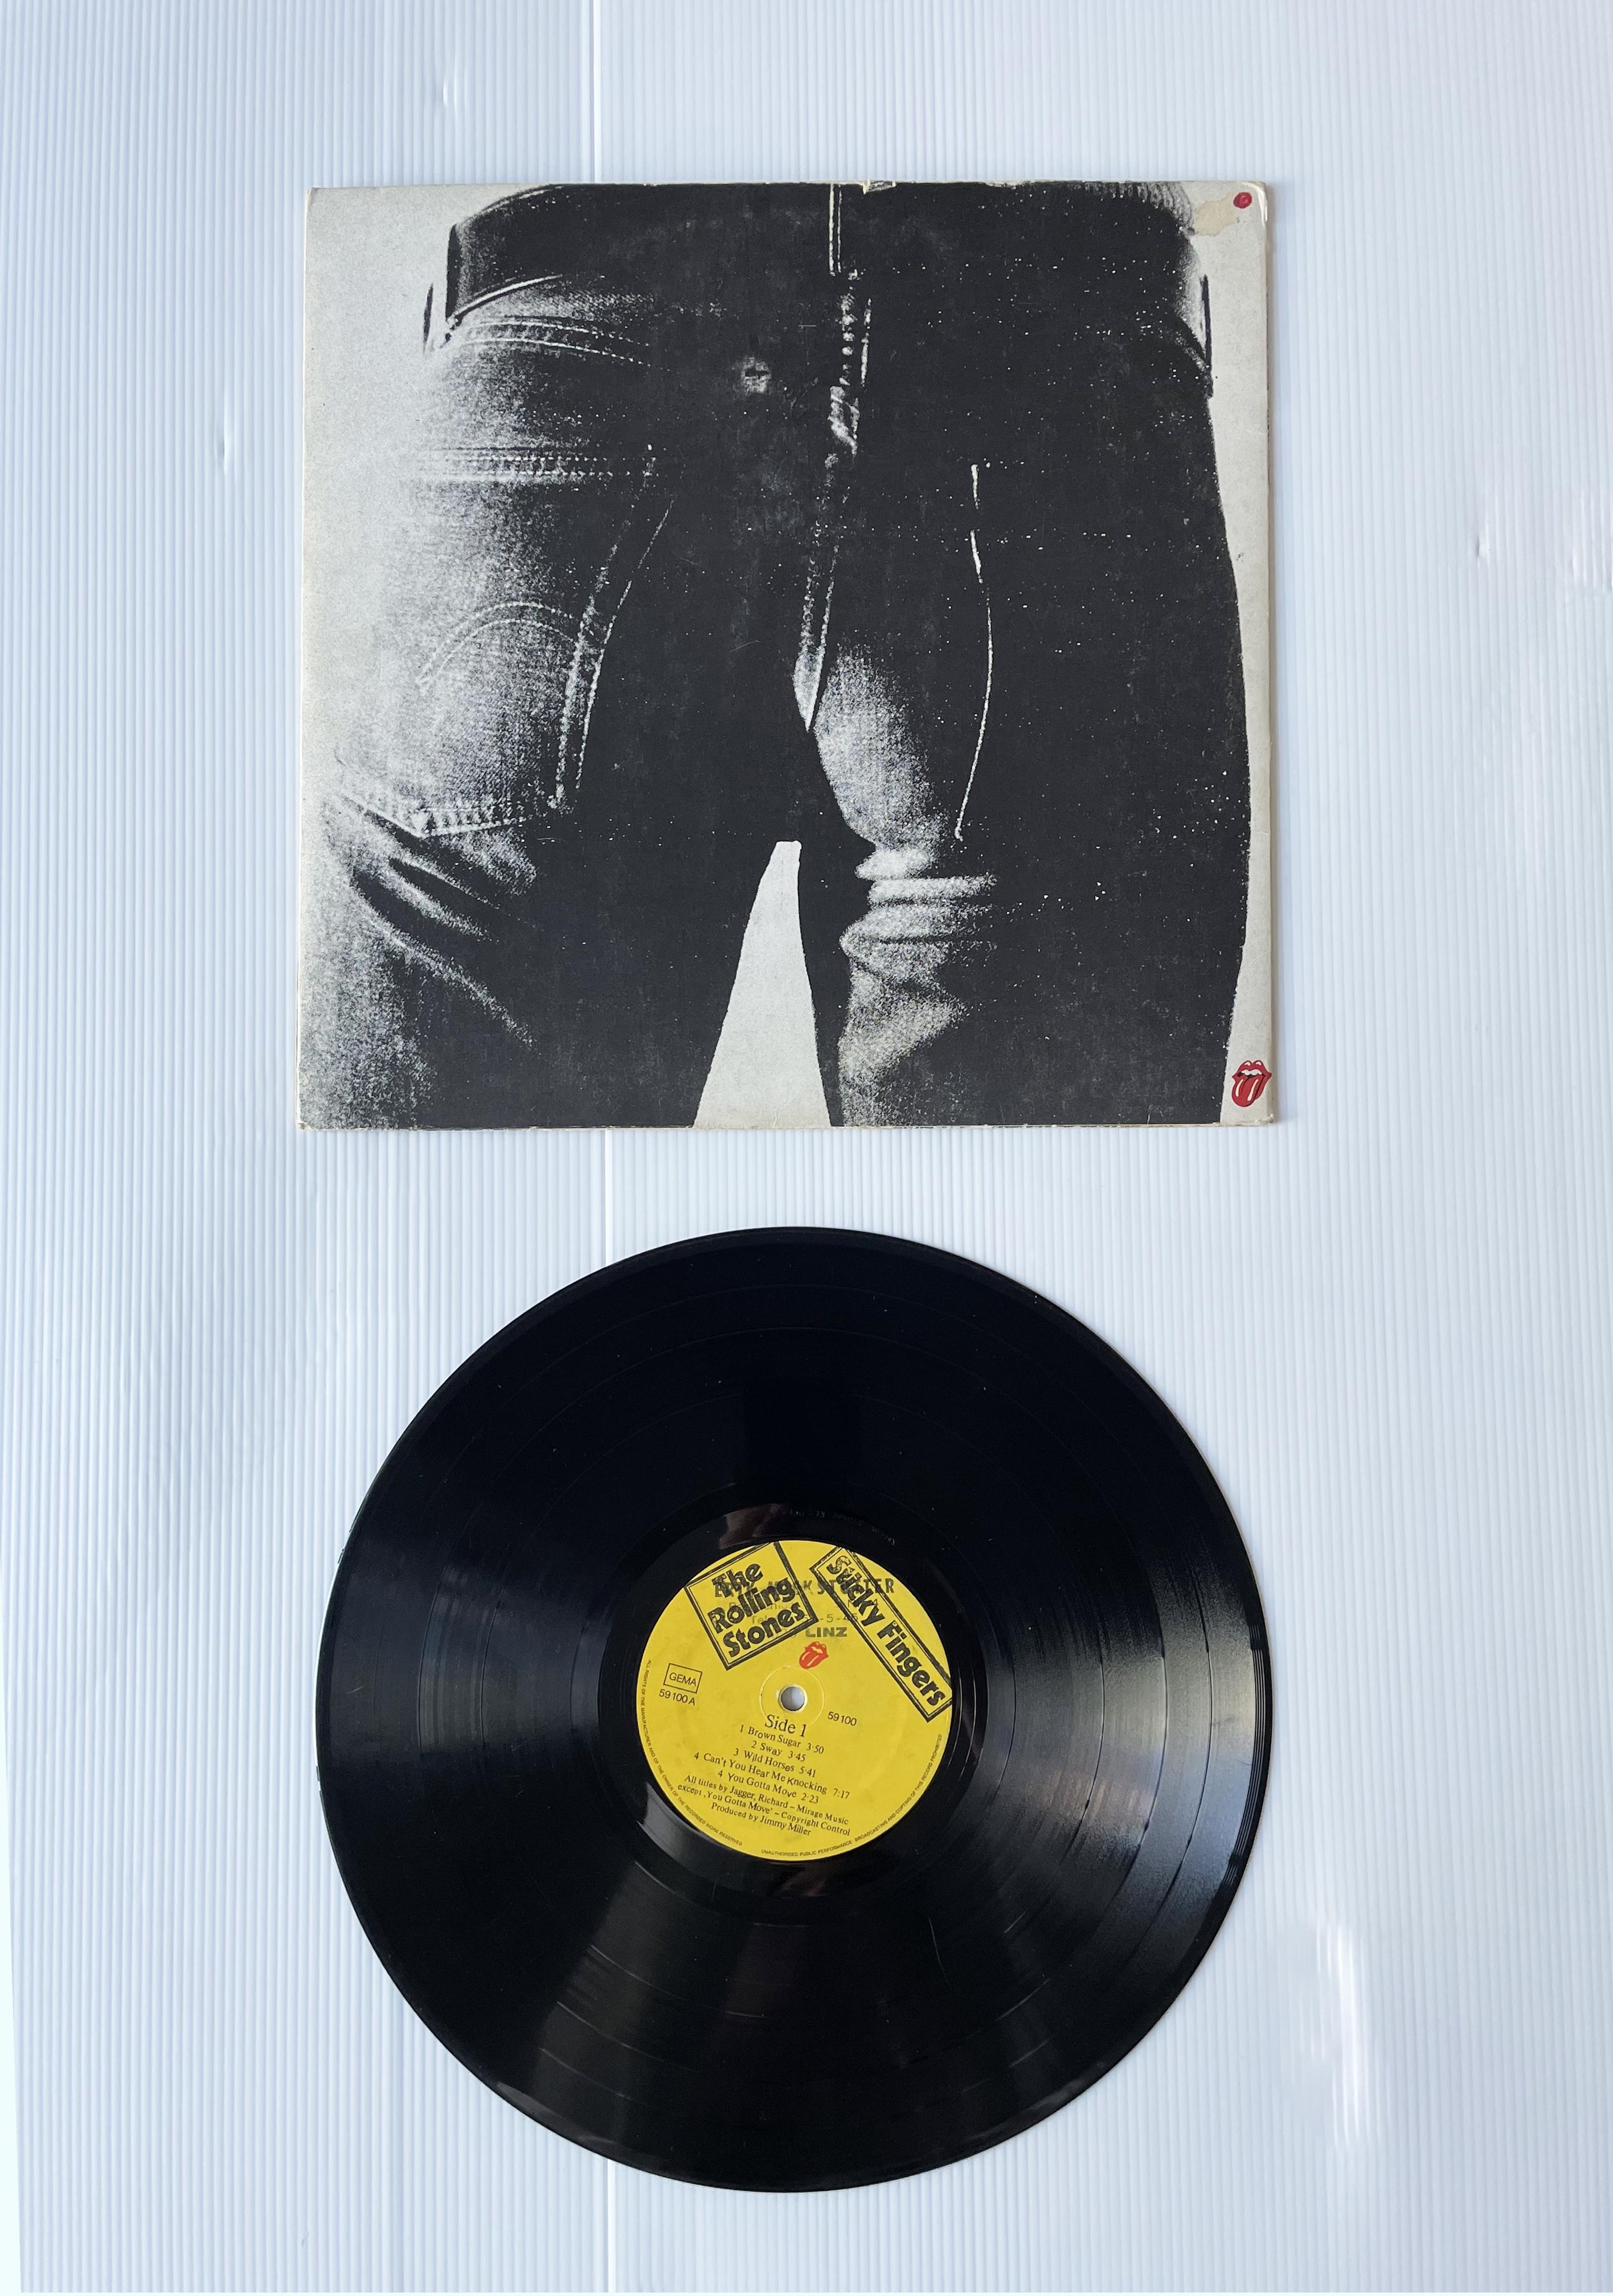 The Rolling Stones
Sticky Fingers, 1971
Vinyl LP, Zipper cover
Rolling Stones Records COC 59100
Cover art commissioned and designed by Andy Warhol, with autograph

COVER DELL’ALBUM THE ROLLING STONES
Copertina di carta
Paper cover

Con